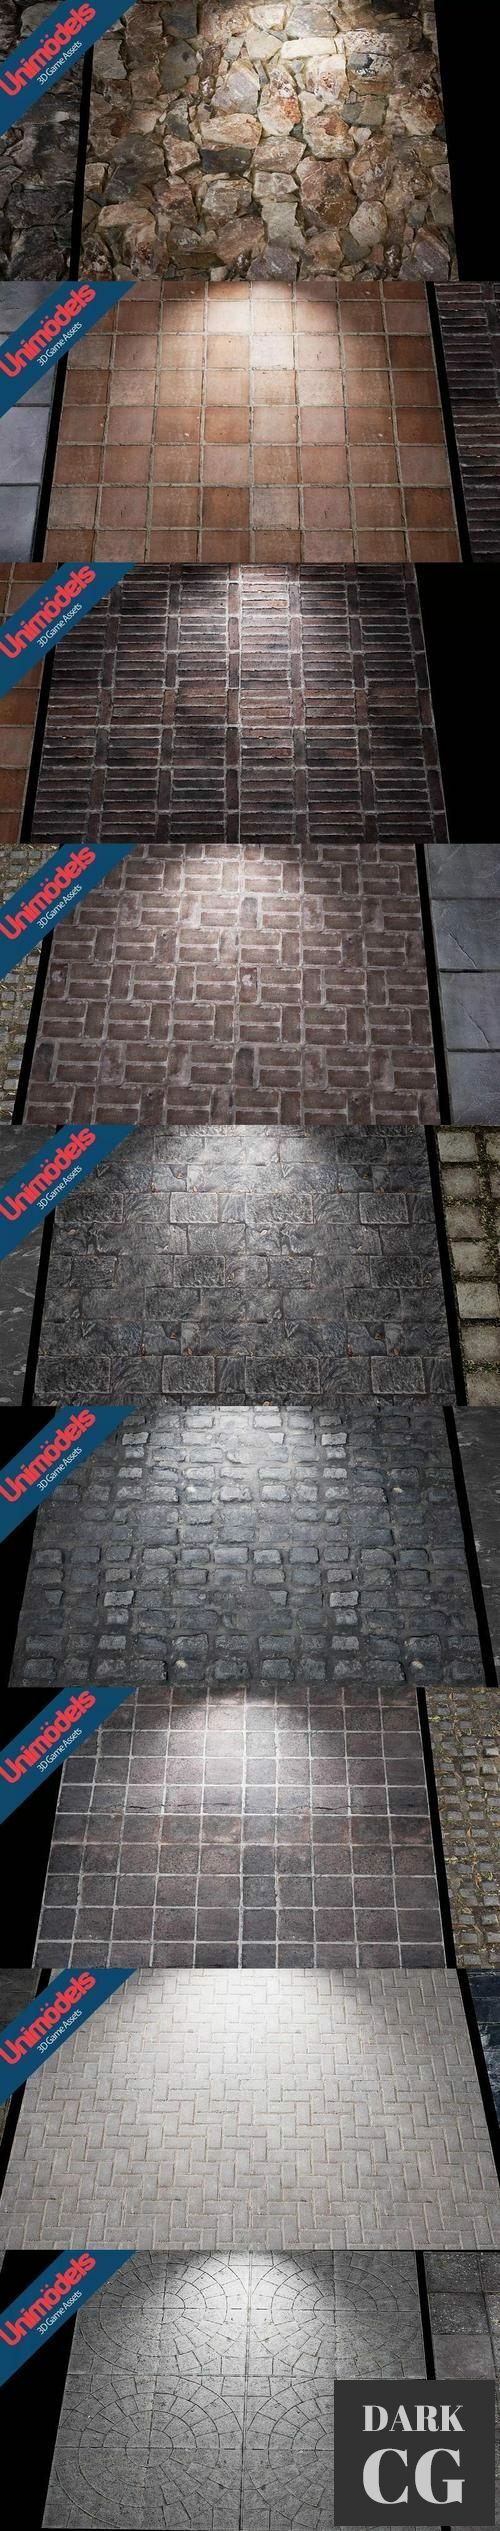 Unity Asset Store Floors and Walls Vol 2 textures photoscanned